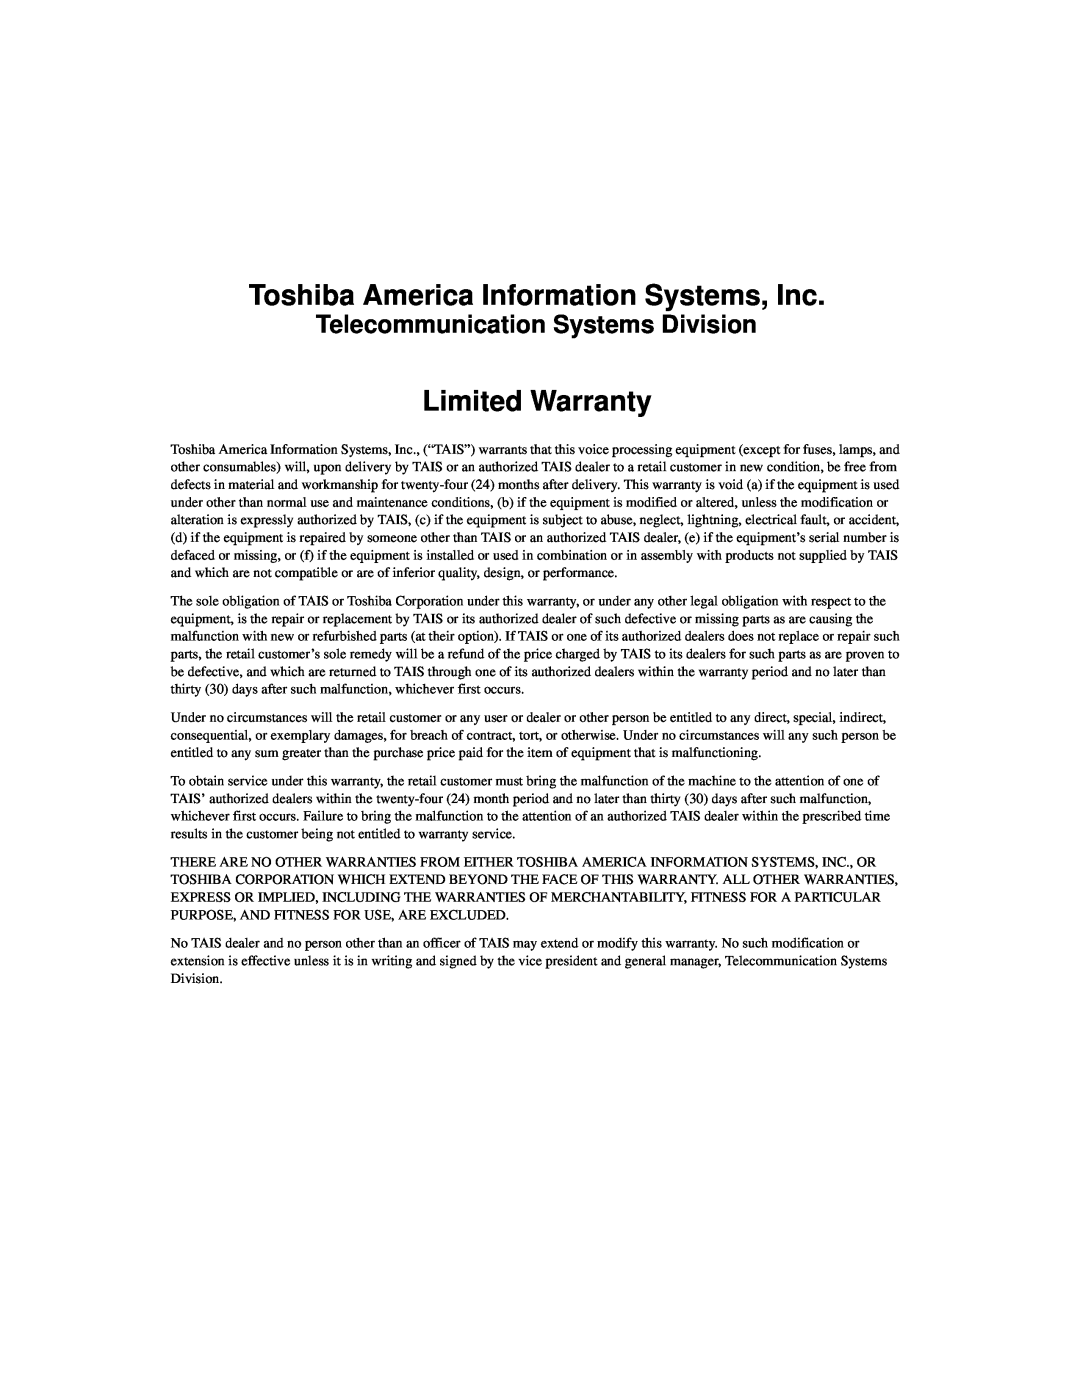 Toshiba DXT3001, 2001 manual Telecommunication Systems Division, Toshiba America Information Systems, Inc, Limited Warranty 